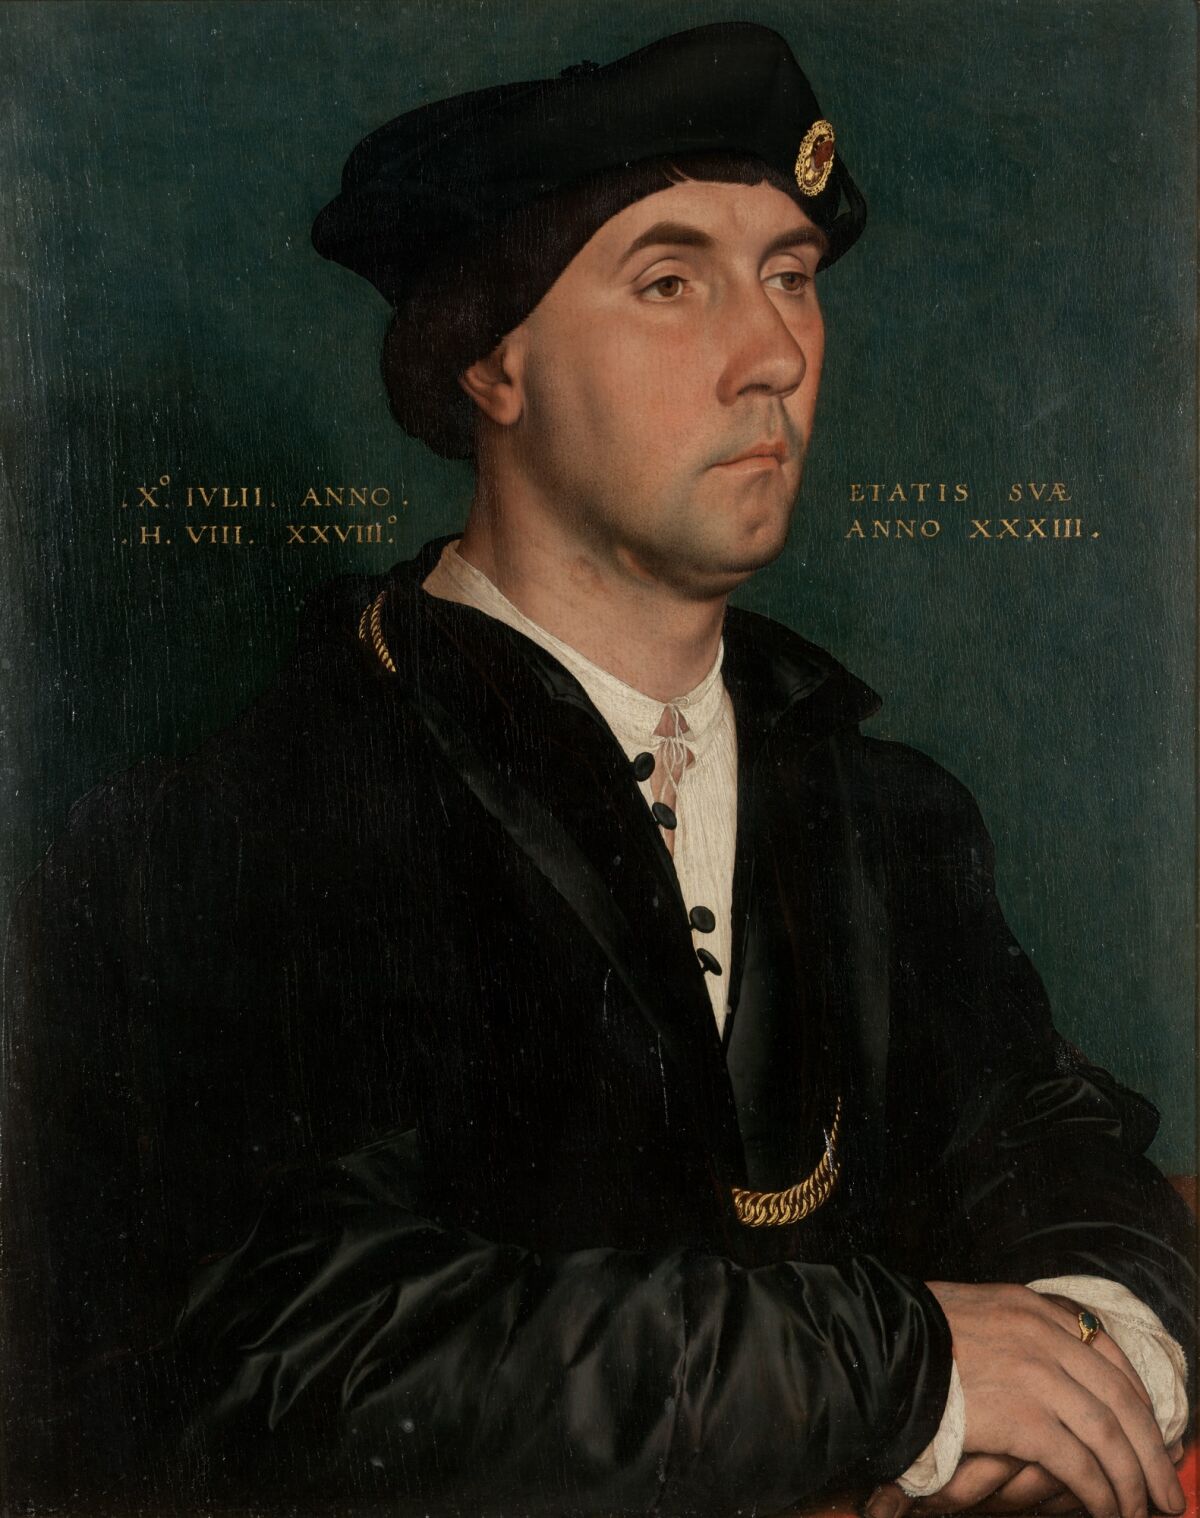 A painting of a man  in a dark hat and coat, with hands folded.